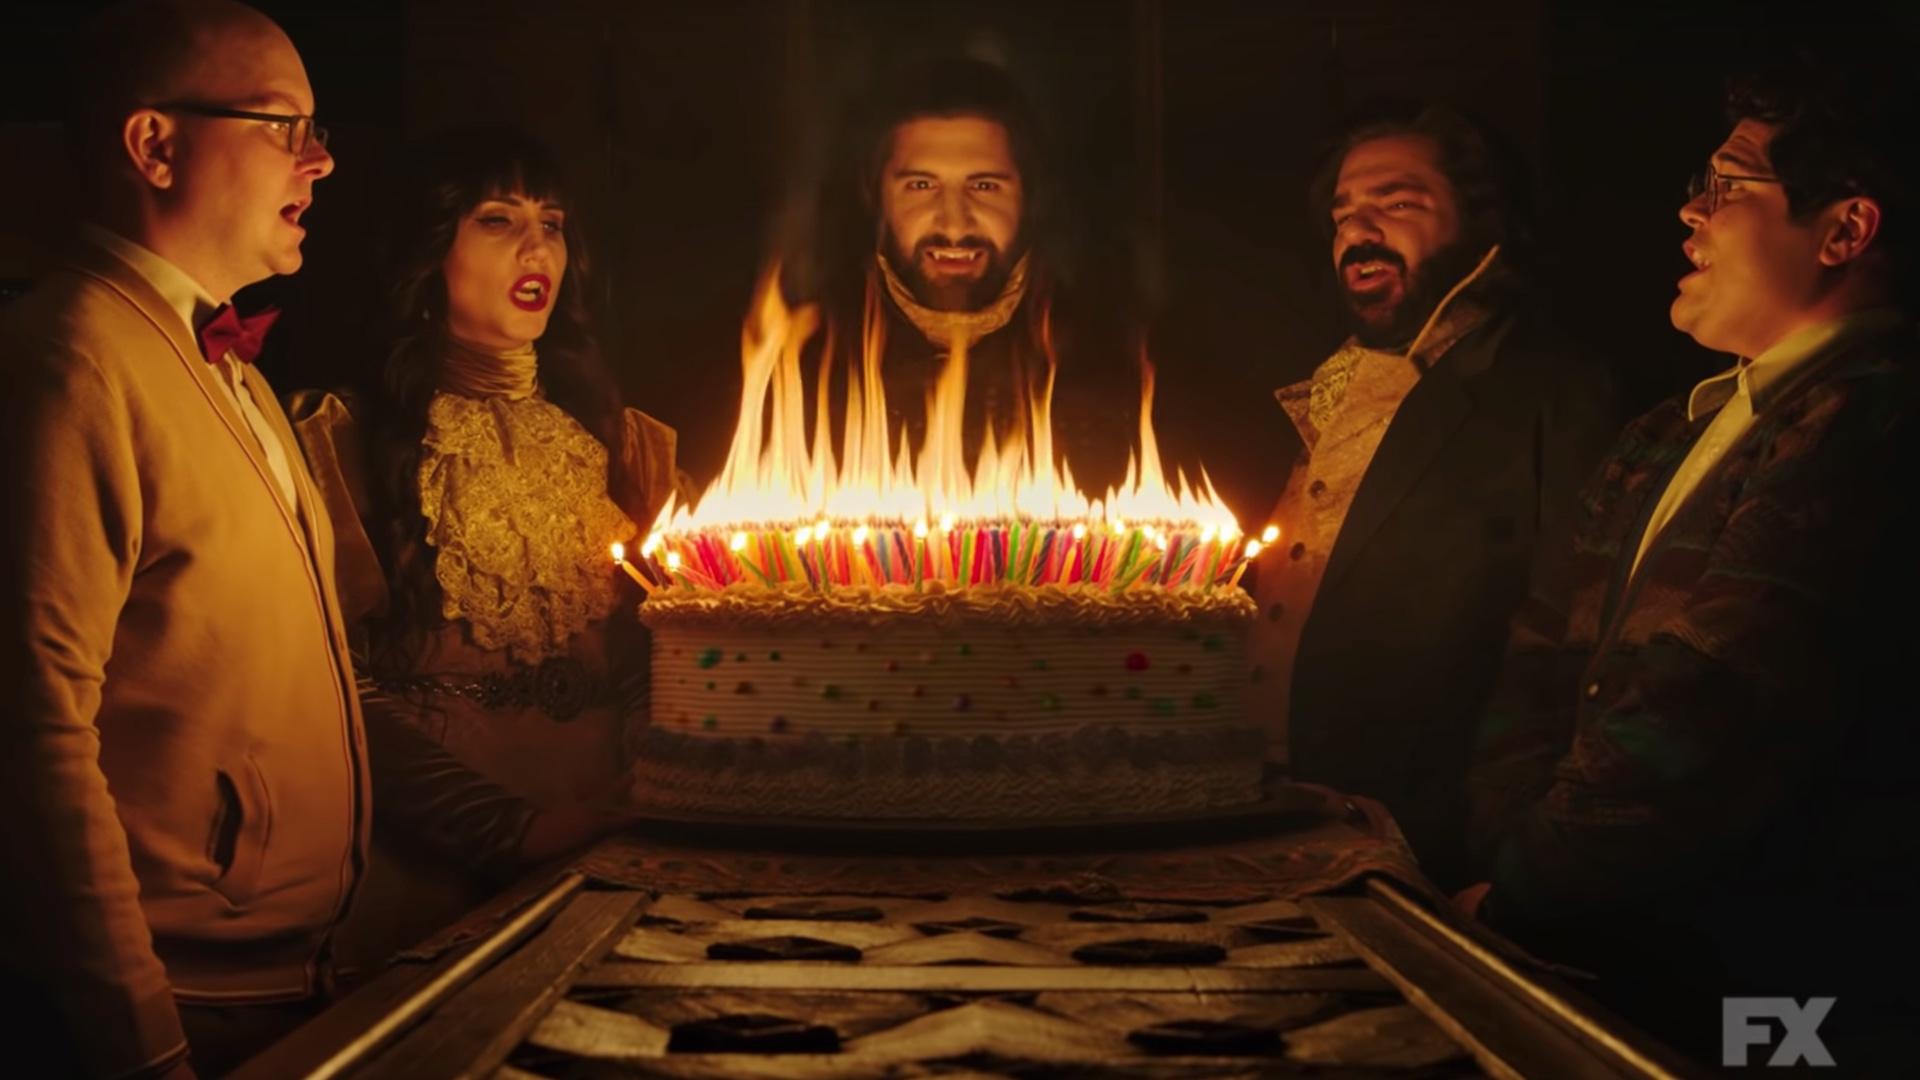 FX's WHAT WE DO IN THE SHADOWS TV Series Gets a Birthday Teaser